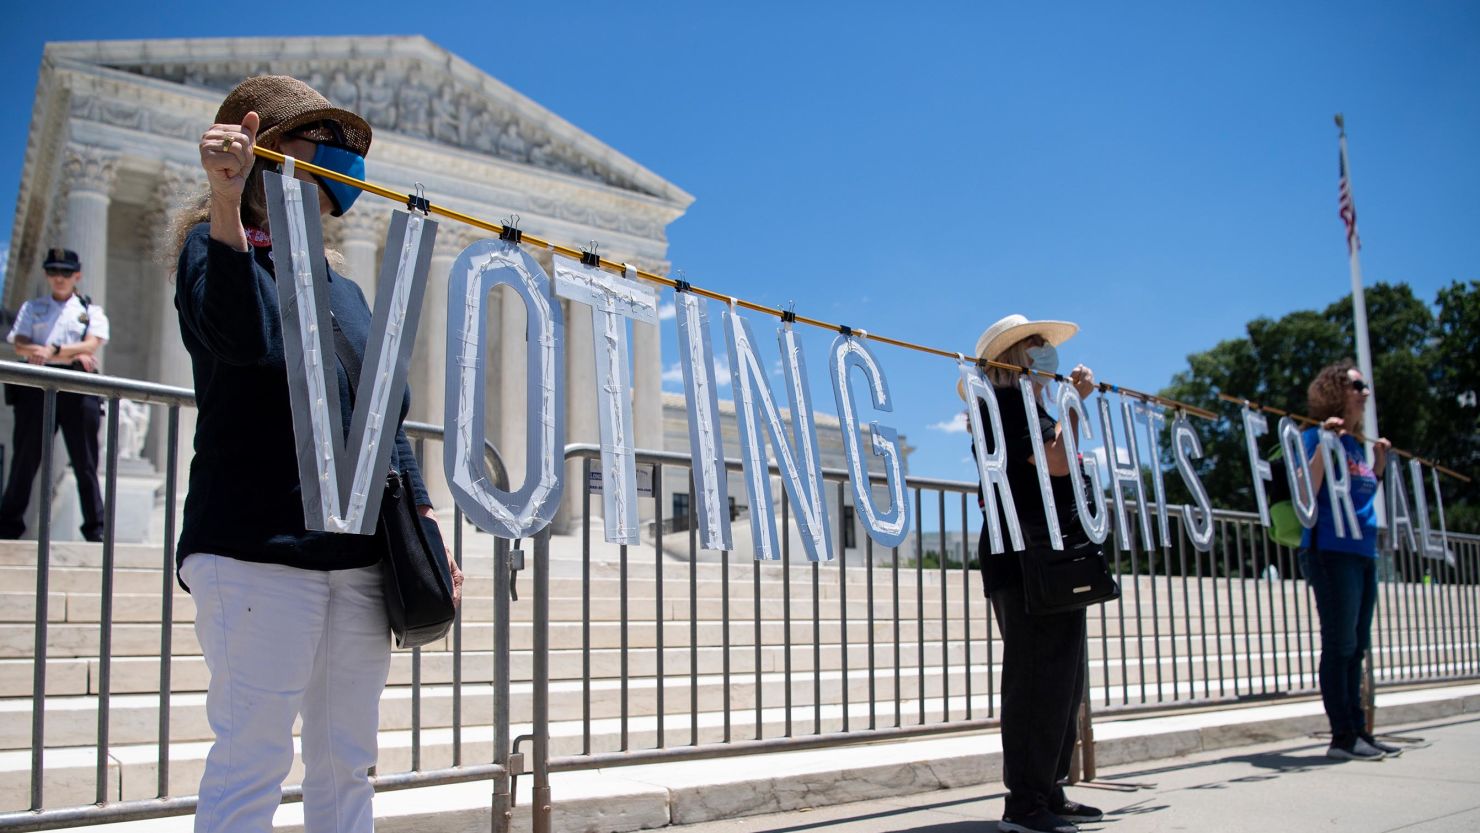 Demonstrators hold up a sign as they participate in the Moral March on Manchin and McConnell, Wednesday, June 23, 2021.